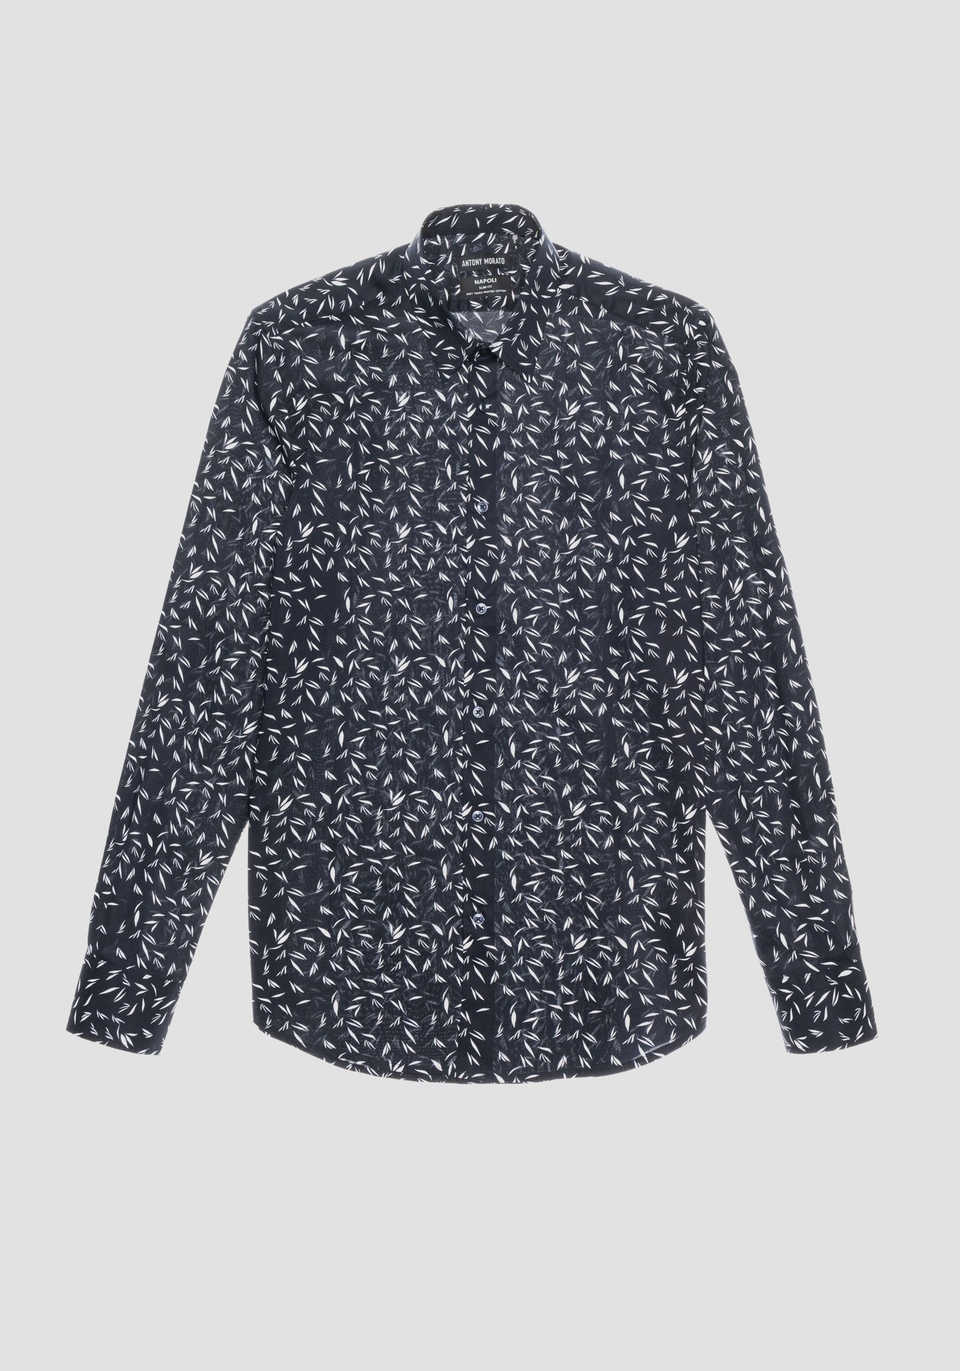 "NAPOLI" SLIM-FIT SHIRT IN SOFT-TOUCH COTTON WITH ALL-OVER LEAF PRINT - Antony Morato Online Shop